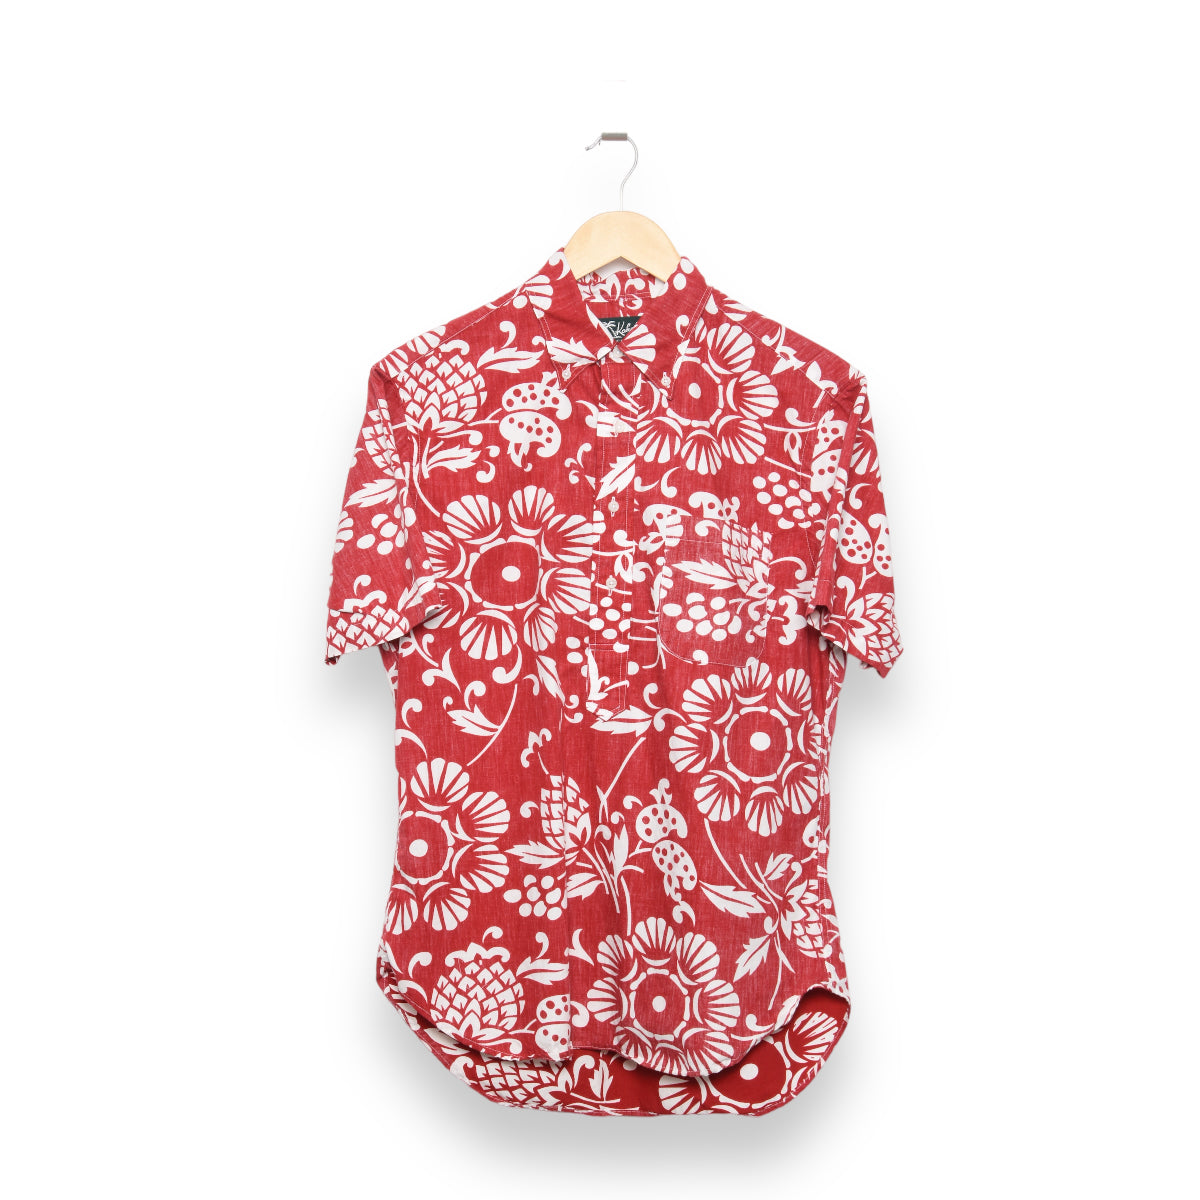 Gitman Brothers Vintage button down shortsleeve red duke's pareo popover